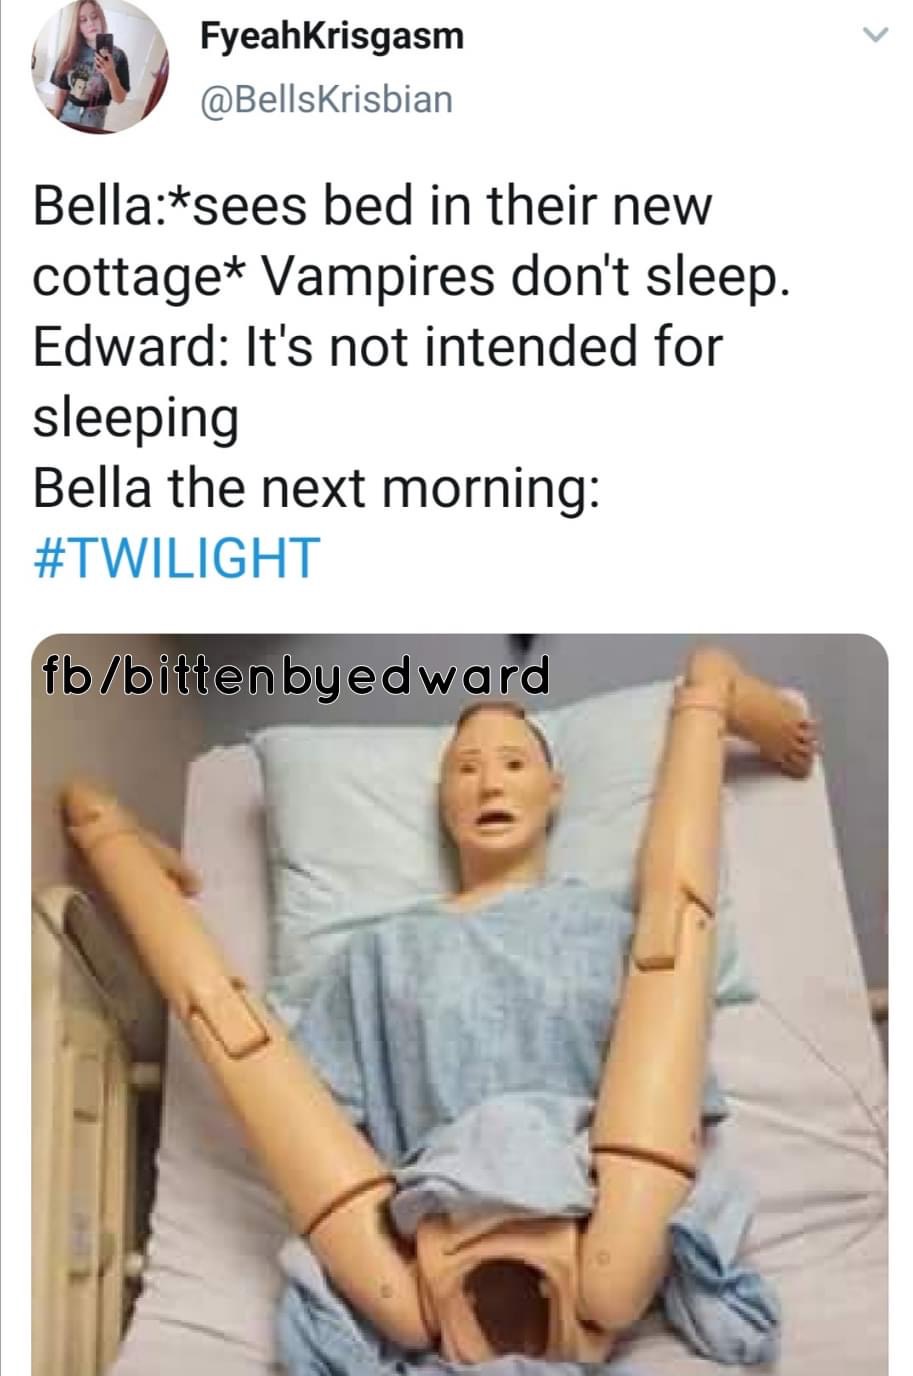 funny pics - bed in their new cottage Vampires don't sleep. Edward It's not intended for sleeping Bella the next morning fbbitten by edward